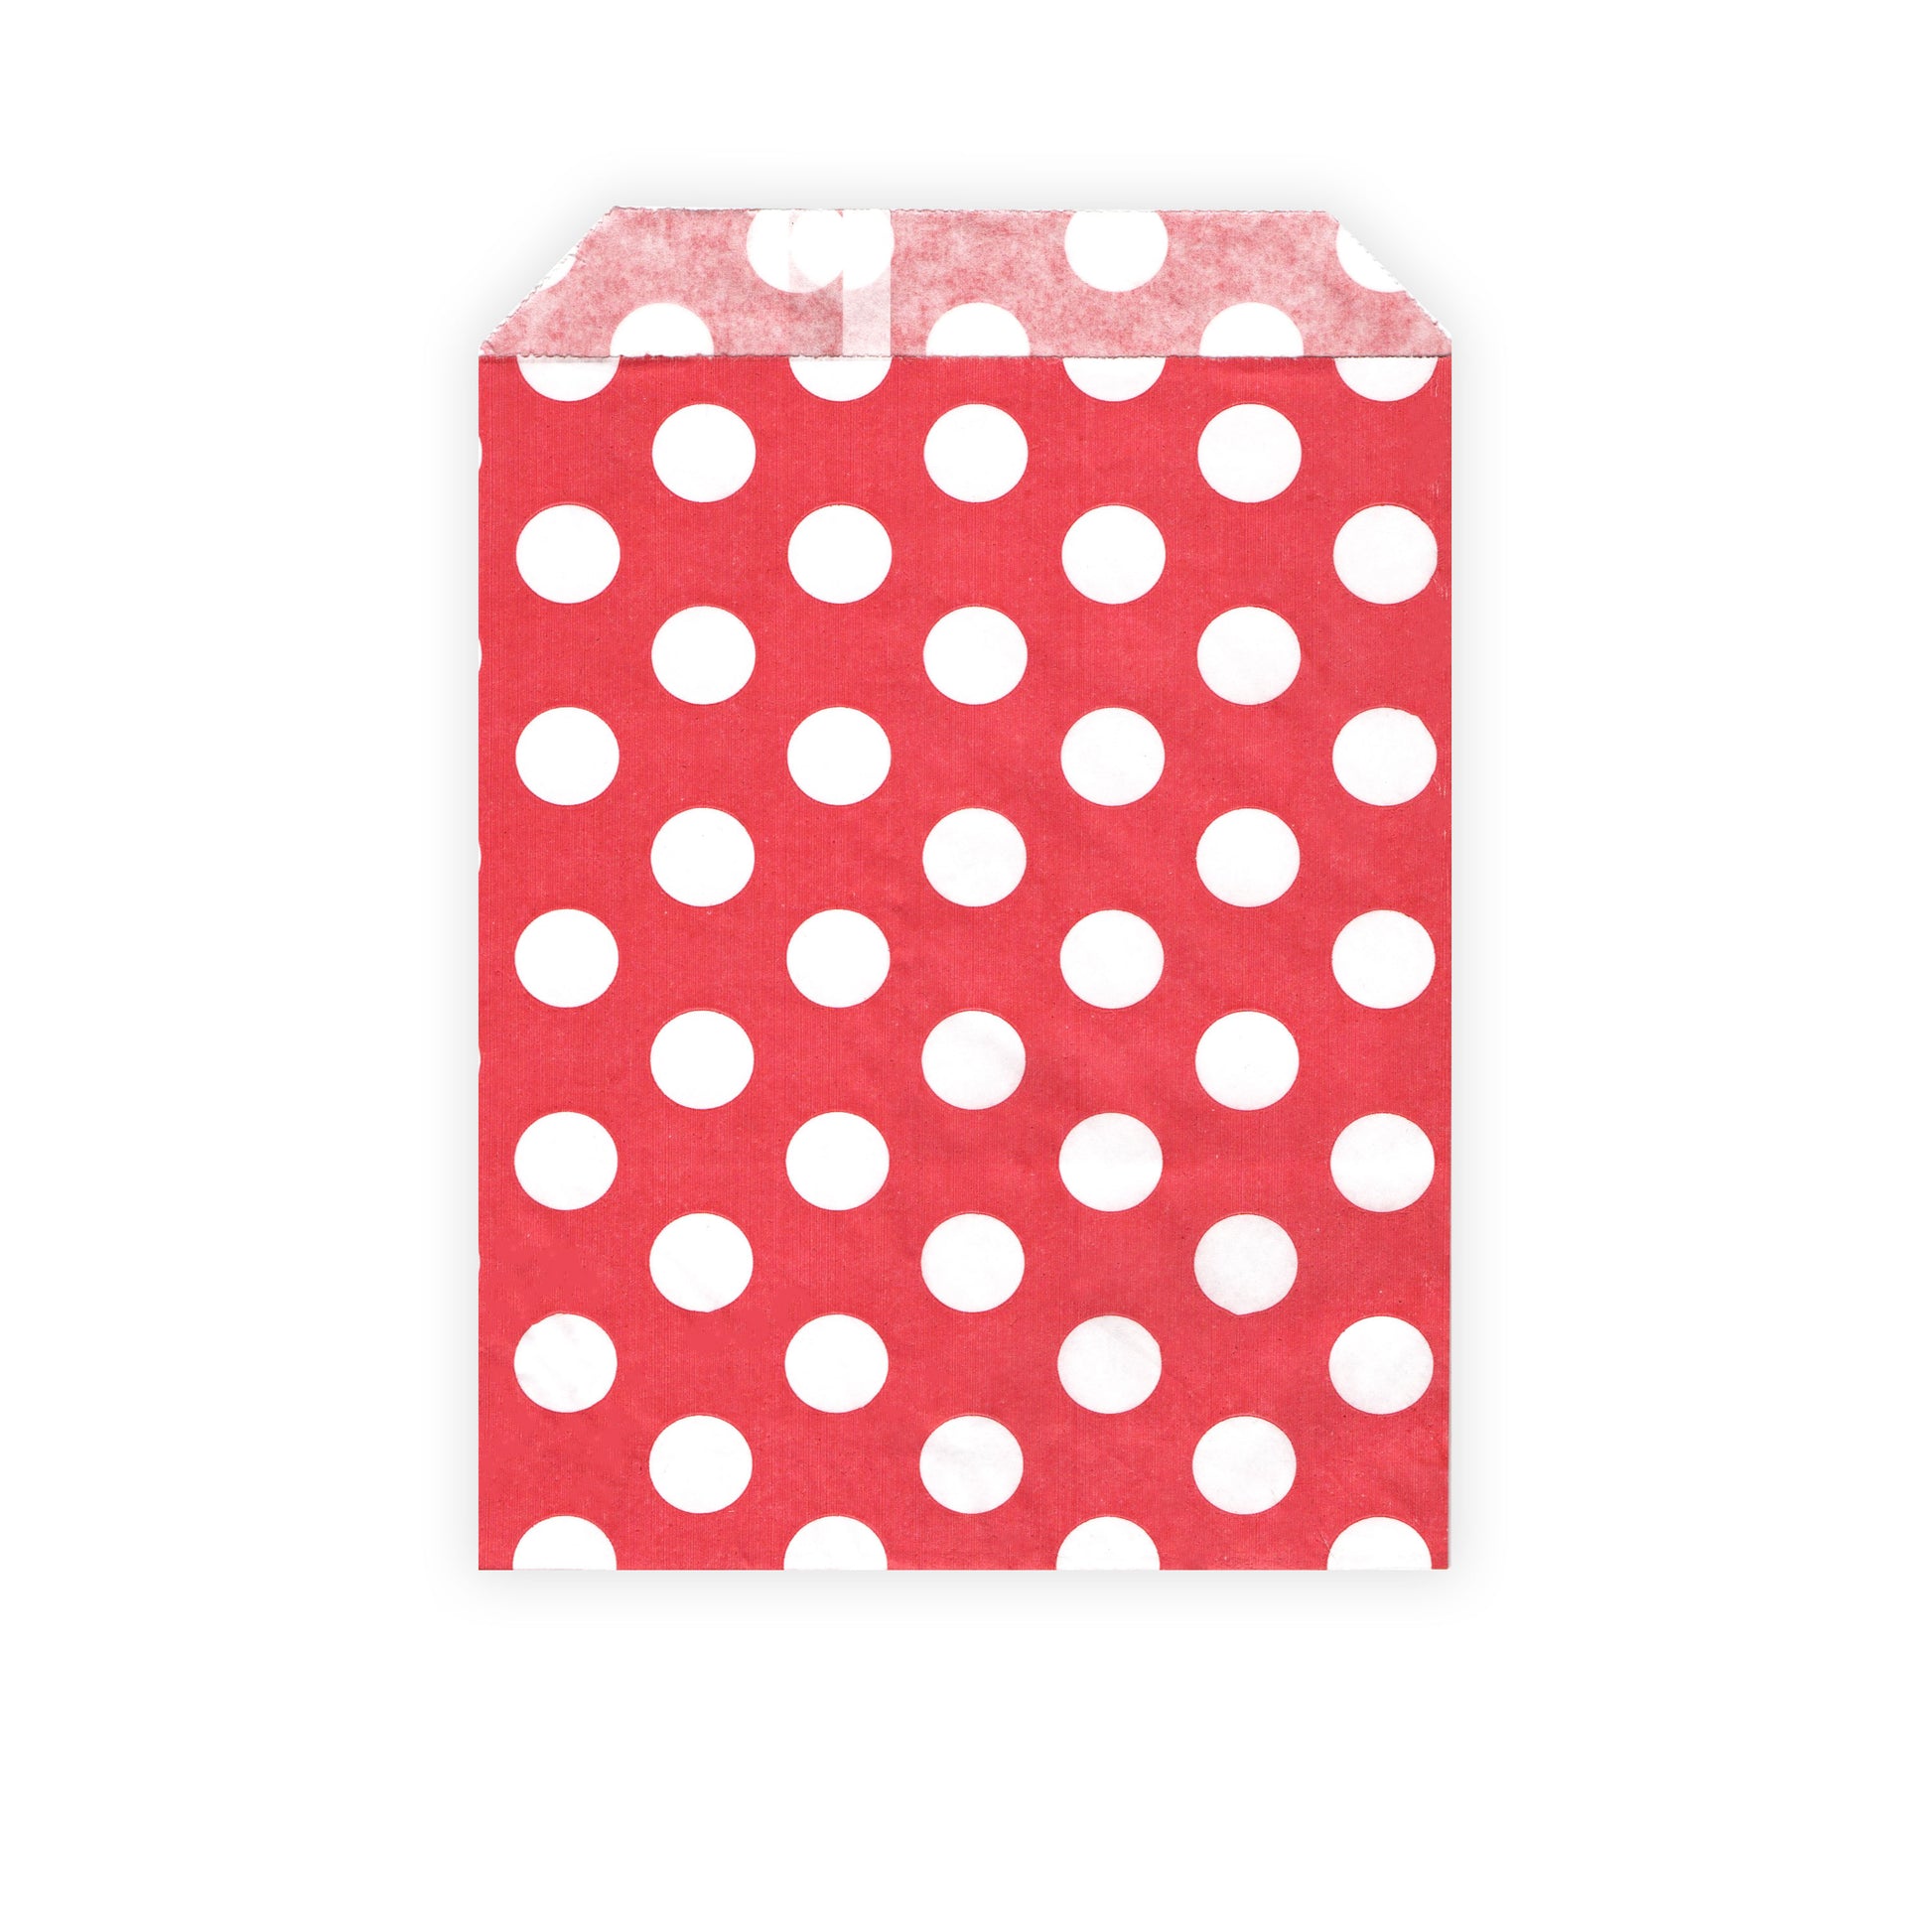 Retro Candy Bags - Red / White Polka Dots - 13 x 18cm by Gobrecht & Ulrich